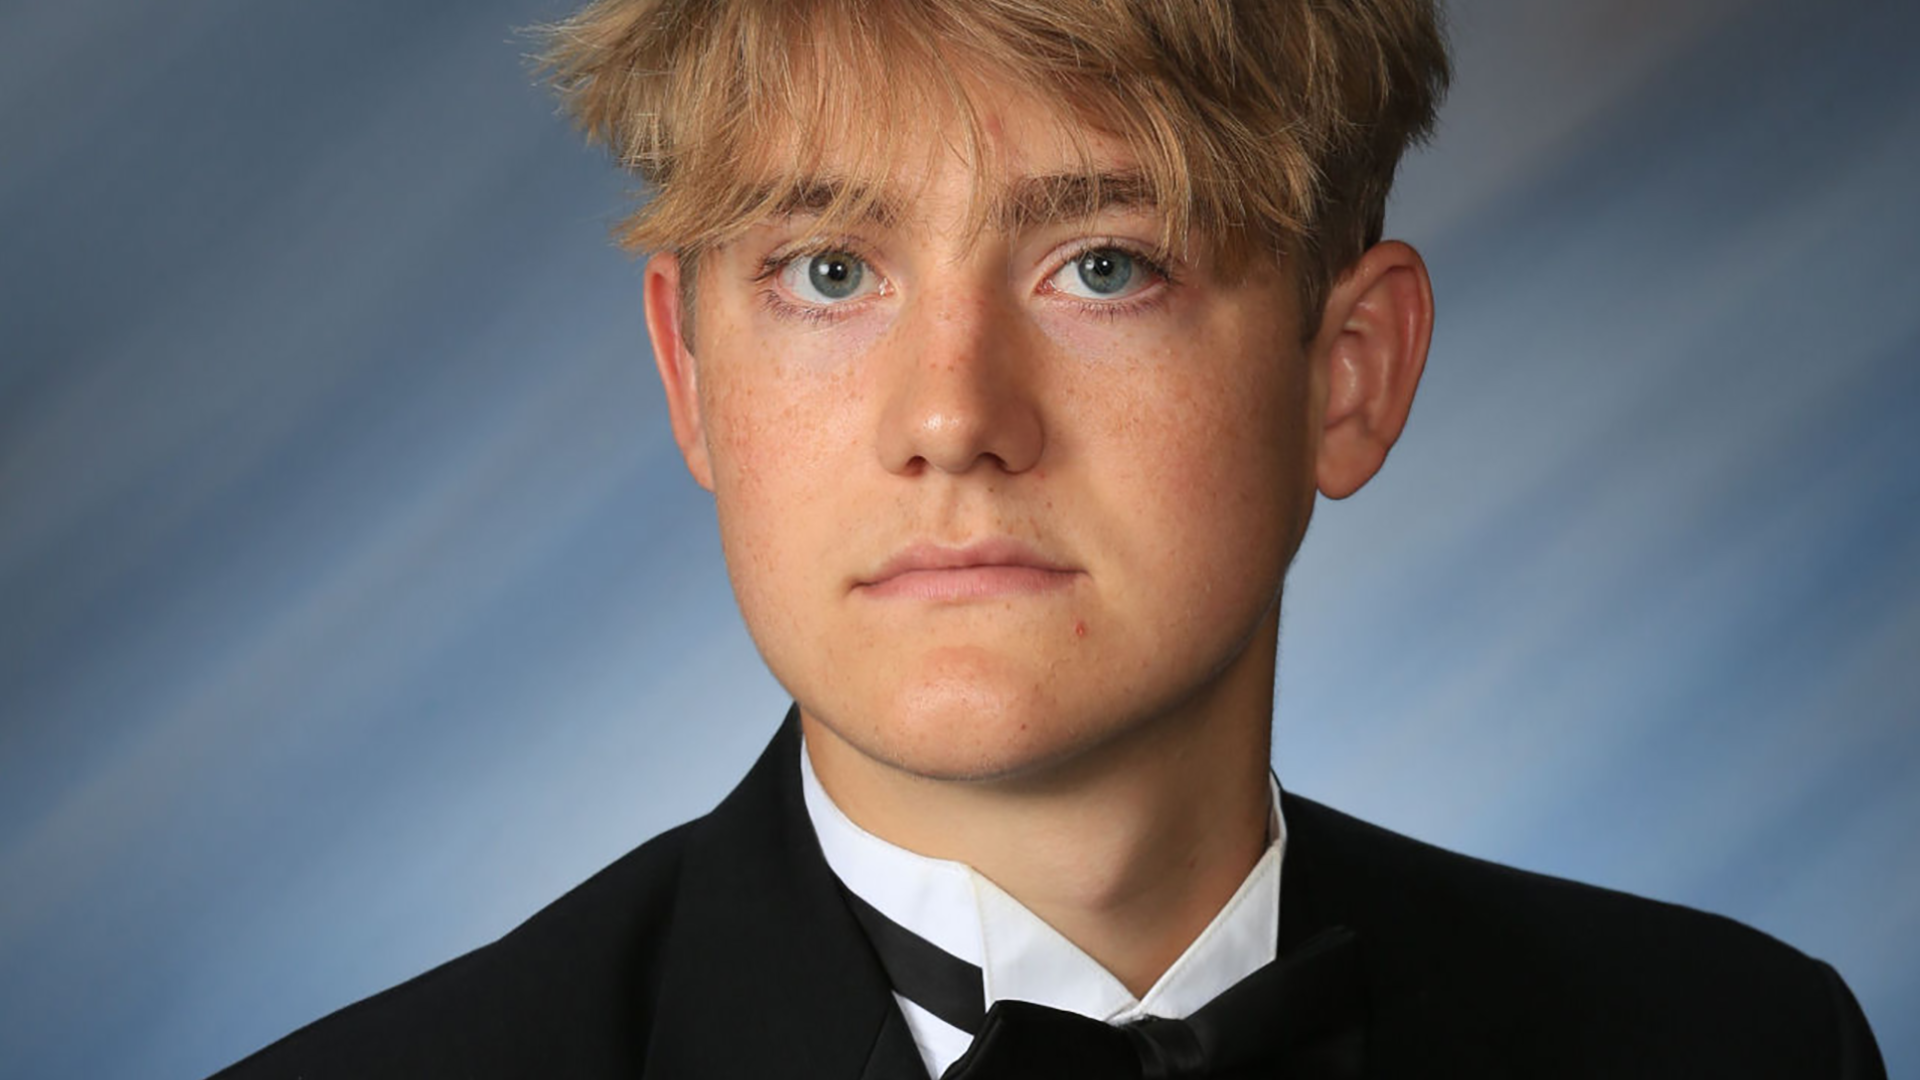 A Lusher Charter School graduate and LSU student has reportedly died after falling from his skateboard and suffering a head injury.

The Times-Picayune | New Orleans Advocate reports that 18-year-old Gilgamesh "Gil" Homan died Tuesday night, two days after being placed on life support.